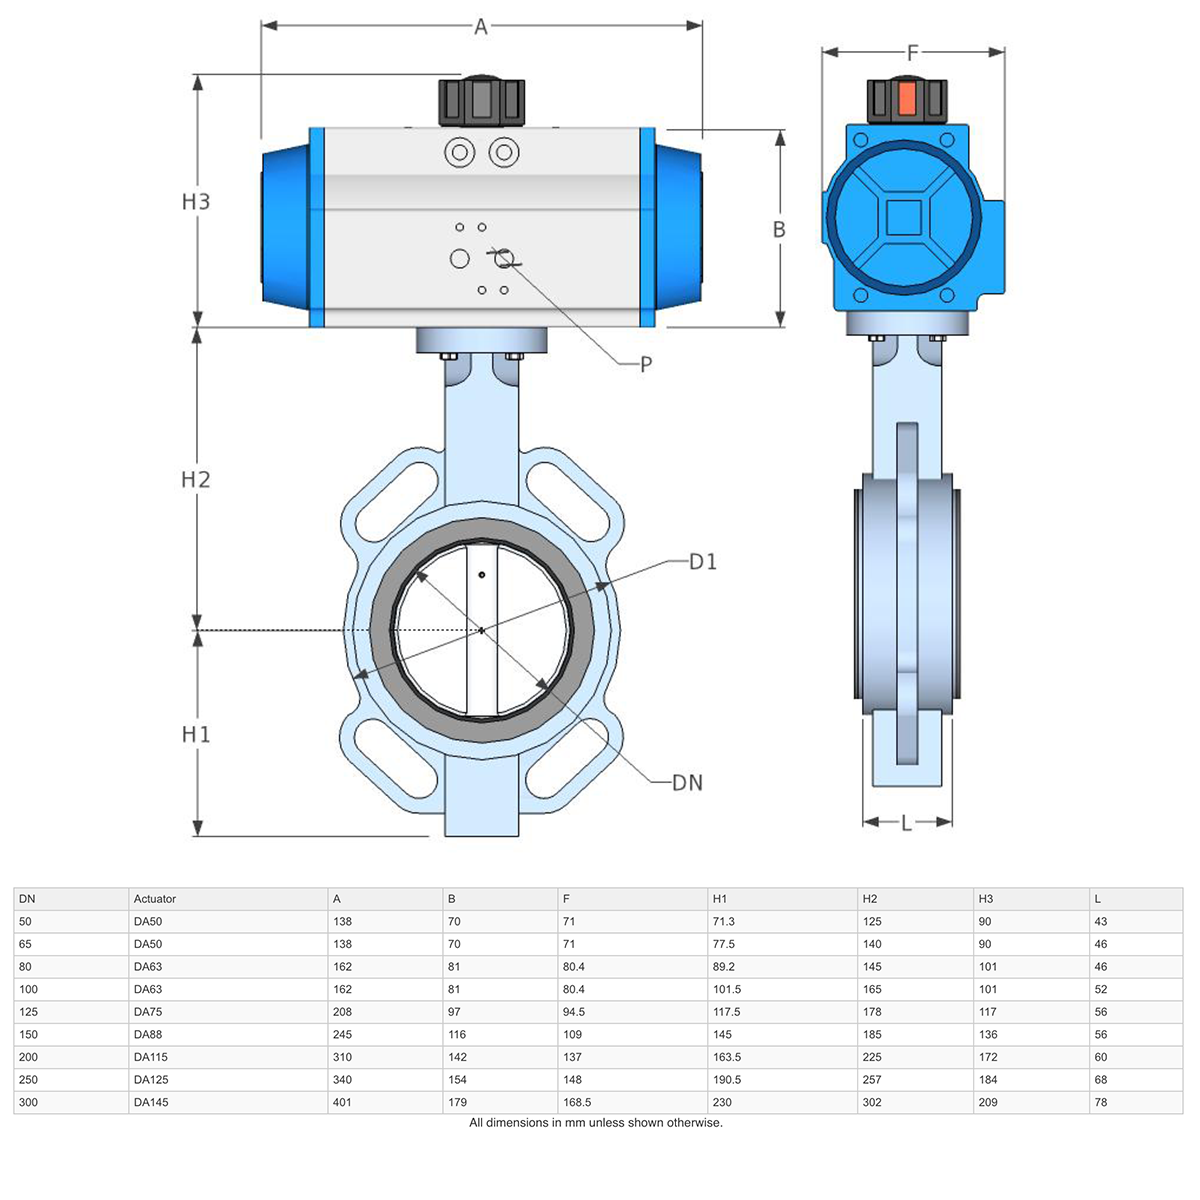 Dimensions - GO Butterfly Valve Actuated Double Acting Pneumatic CI Body 304 SS Disc EPDM Liner 2" to 12" BFKDA Range